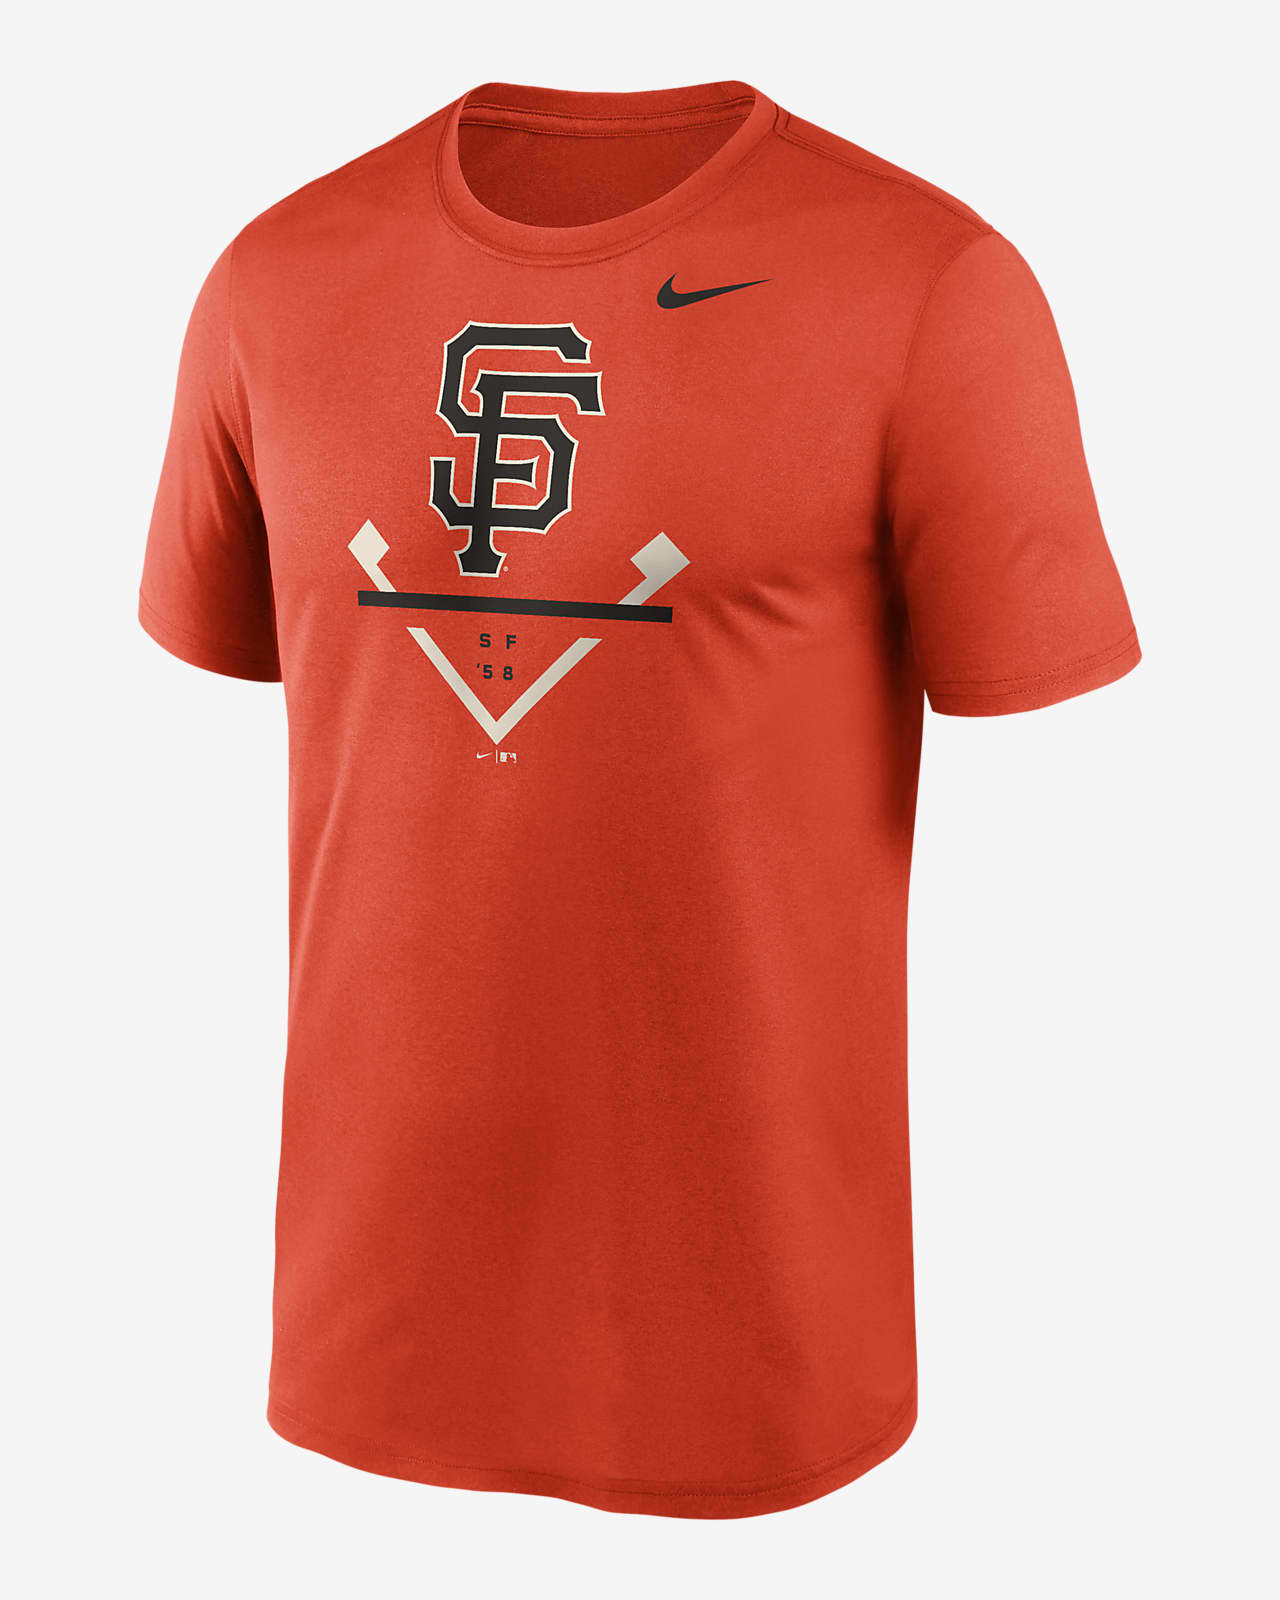 San Francisco Giants Logo symbol meaning history PNG brand